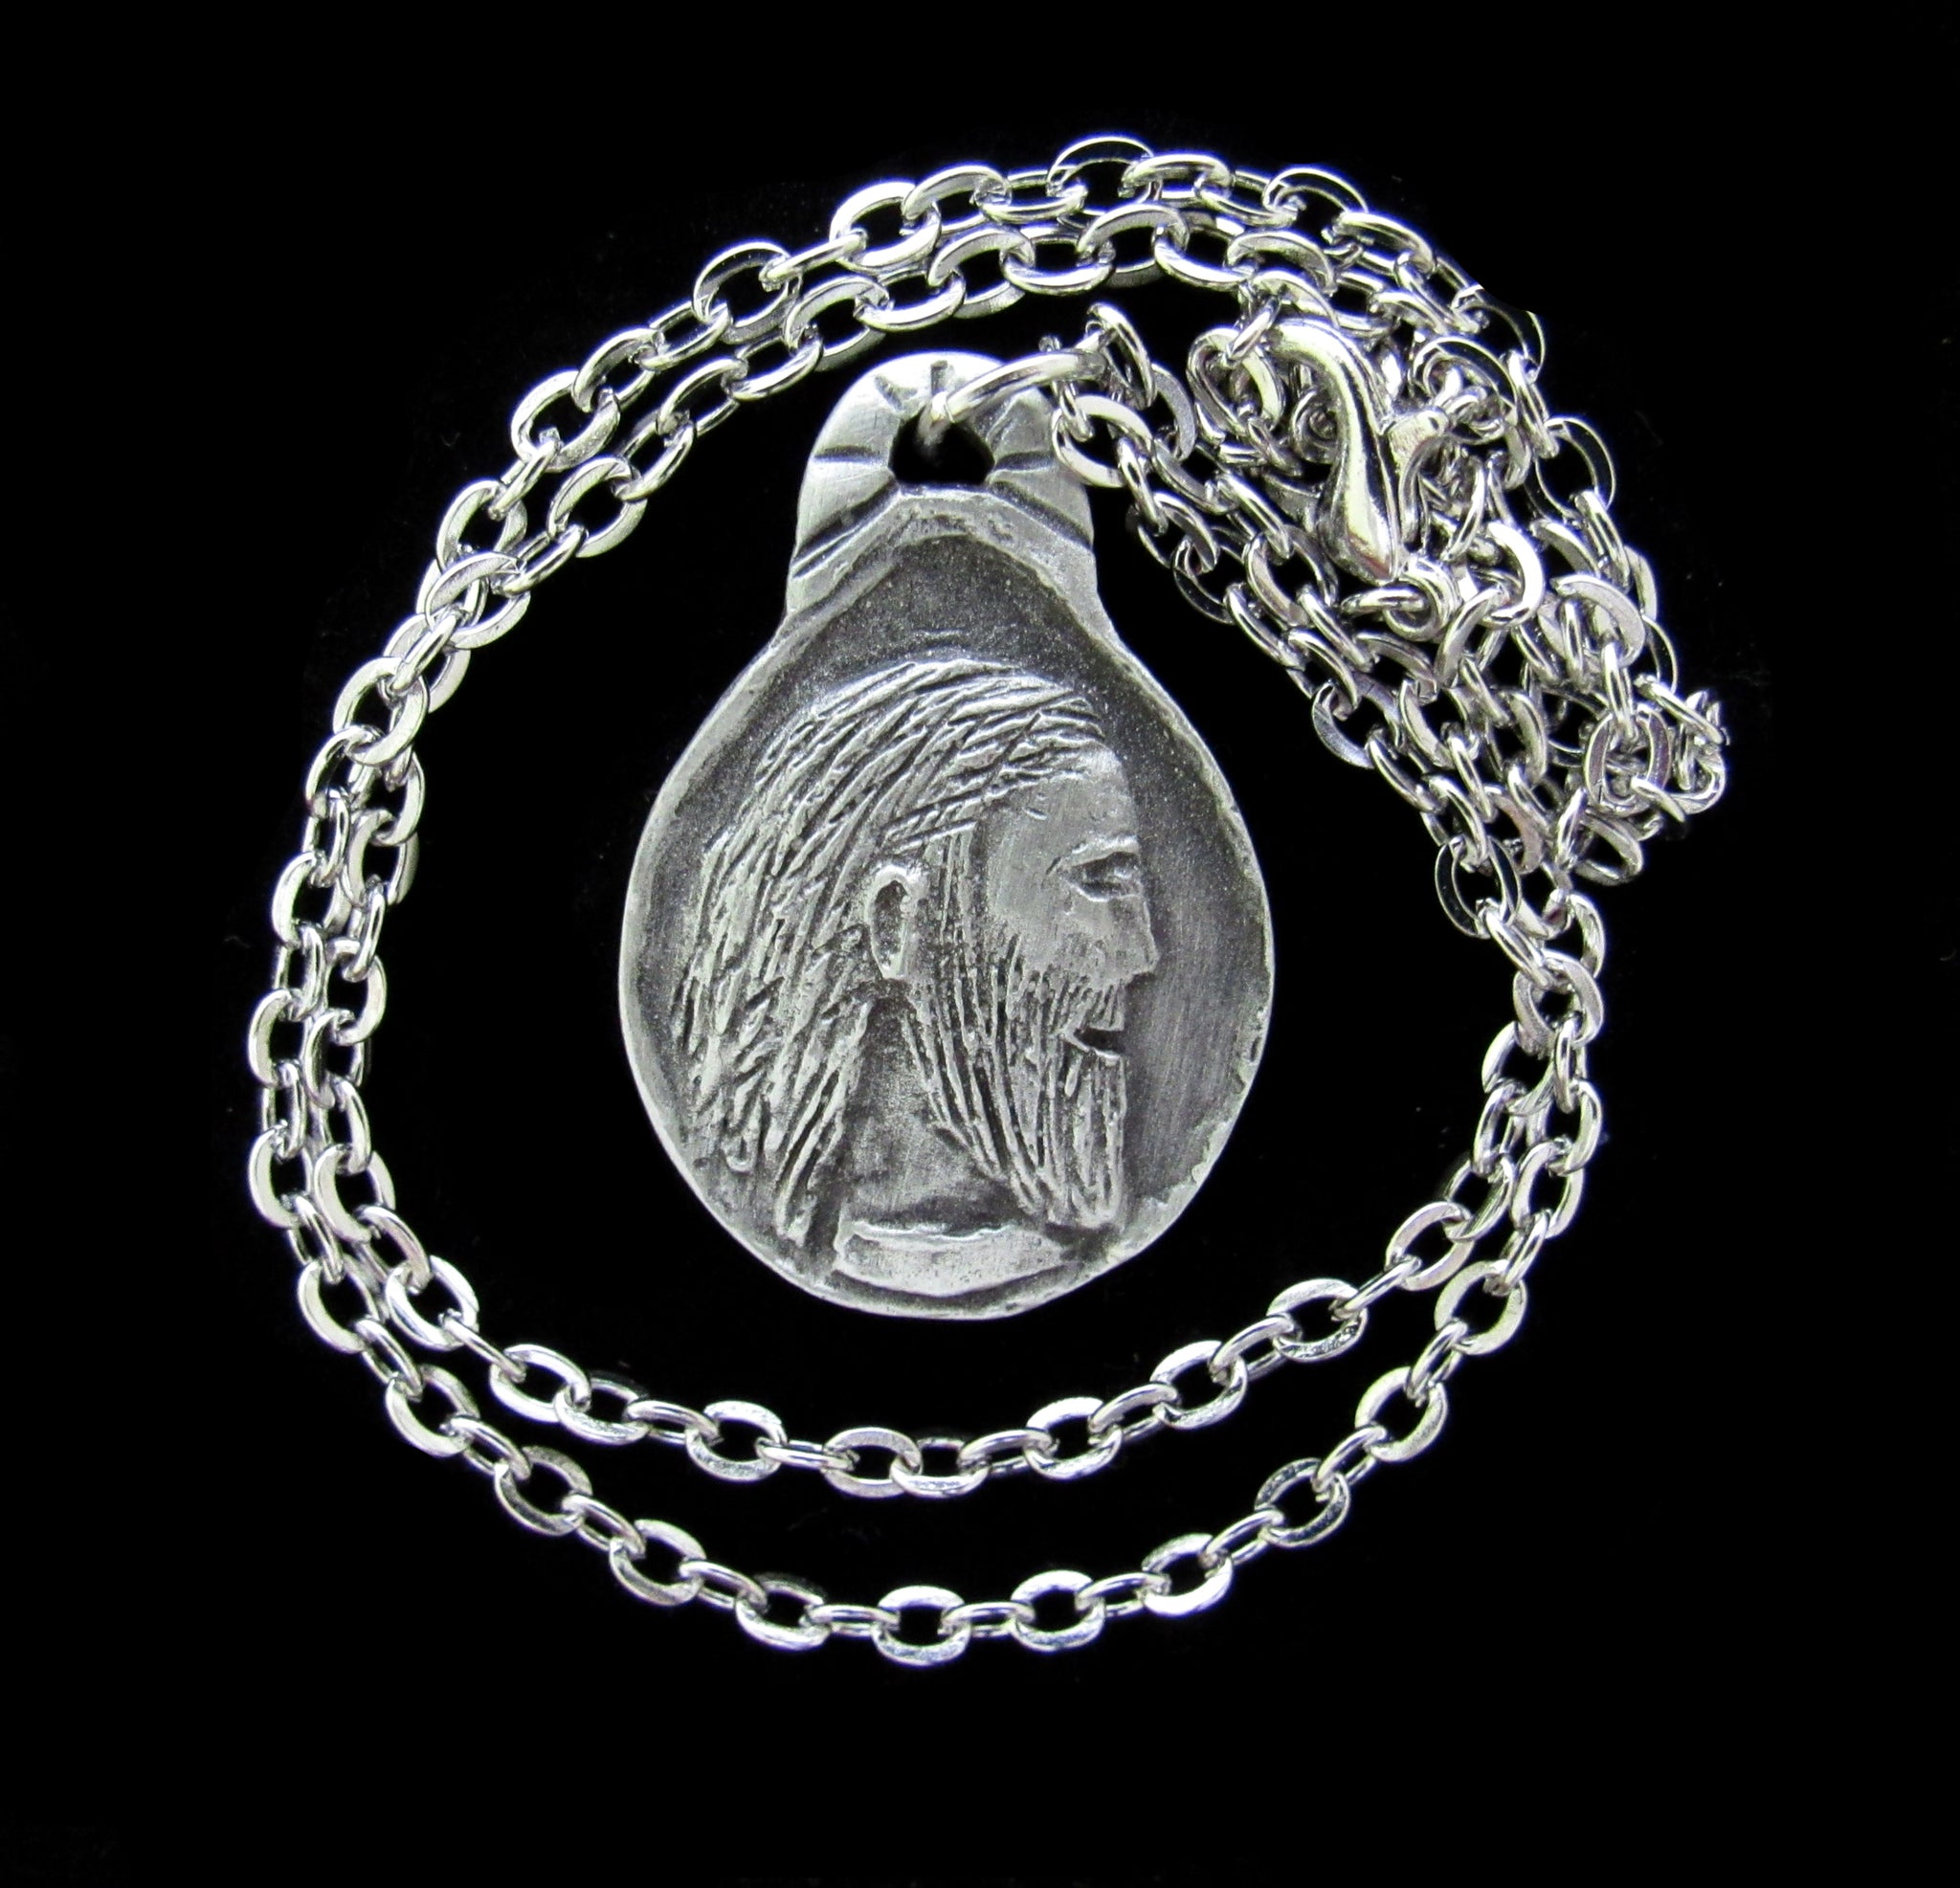 Handmade St. Jude Medal on Chain: Healer, Patron of Those in Difficult Times